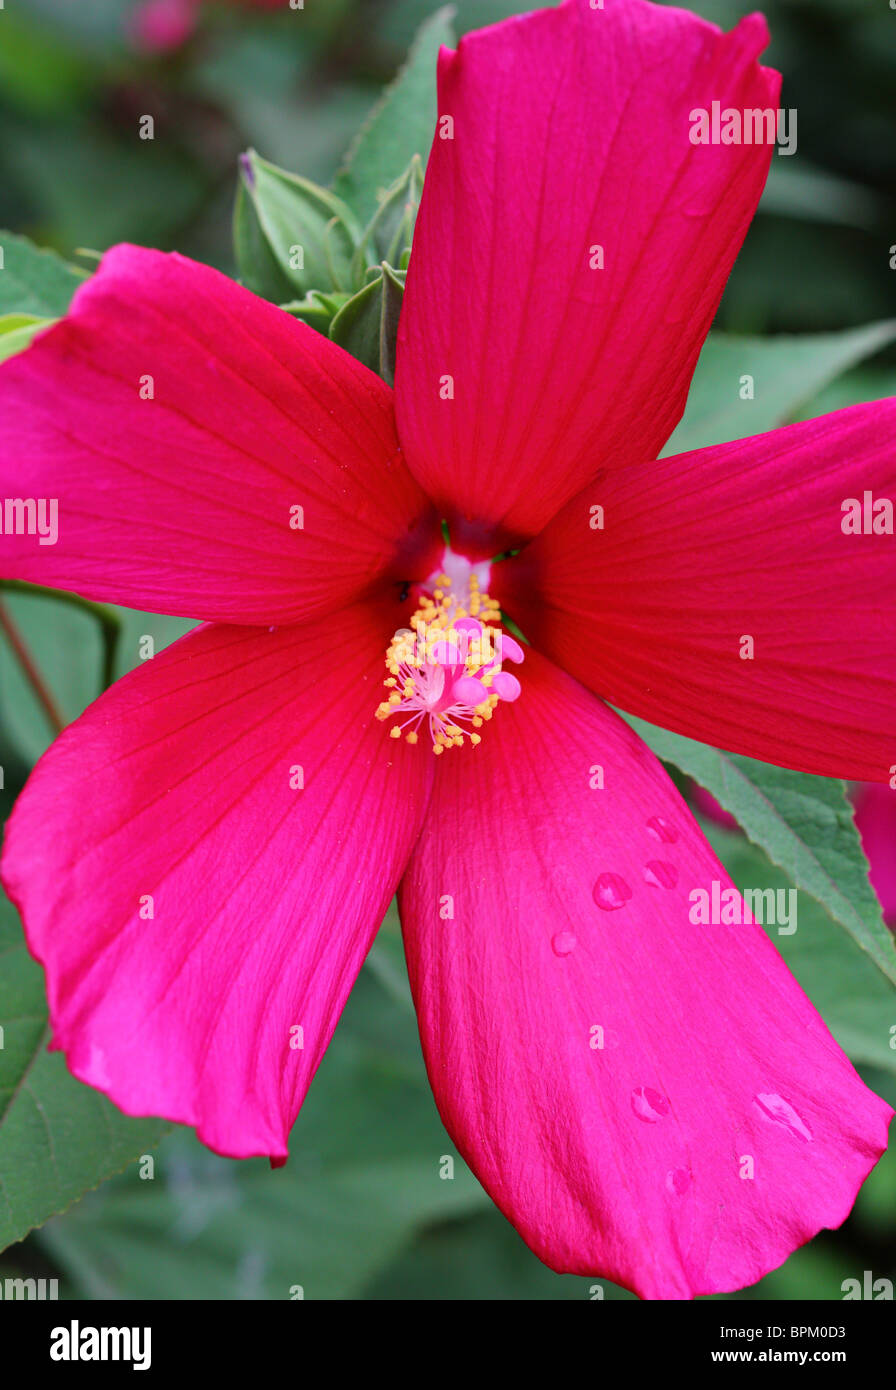 Red swamp rose mallow flower close up Hibiscus moscheutos Stock Photo